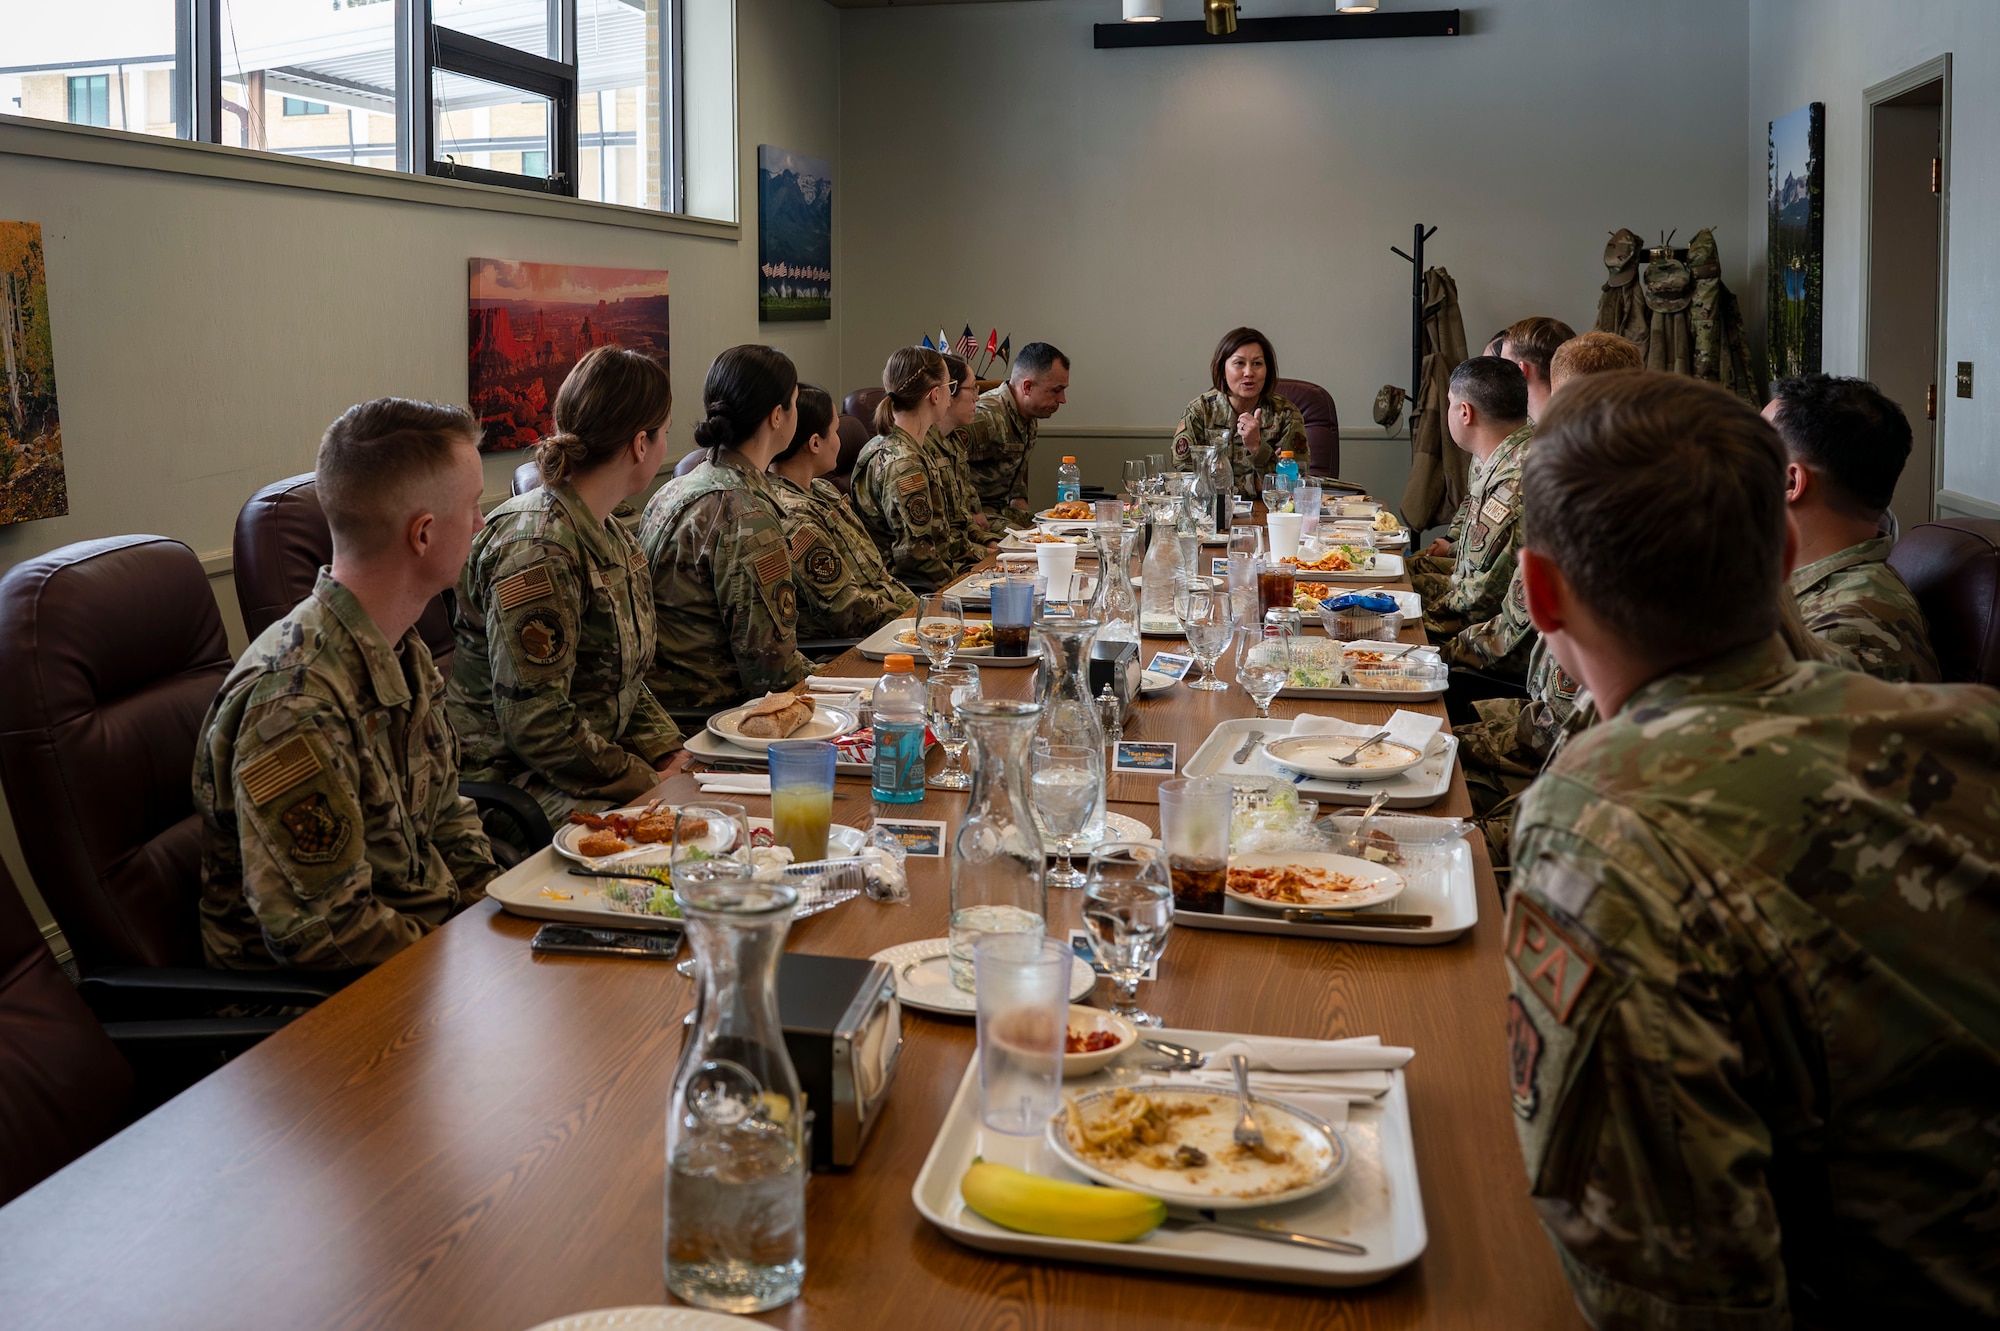 Chief Master Sgt. of the Air Force JoAnne Bass visited the 419th Fighter Wing, Hill Air Force Base, January 7, 2023 – getting an up-close look at the wing’s mission, having lunch with outstanding performers, and conducting an All Call with the wing.